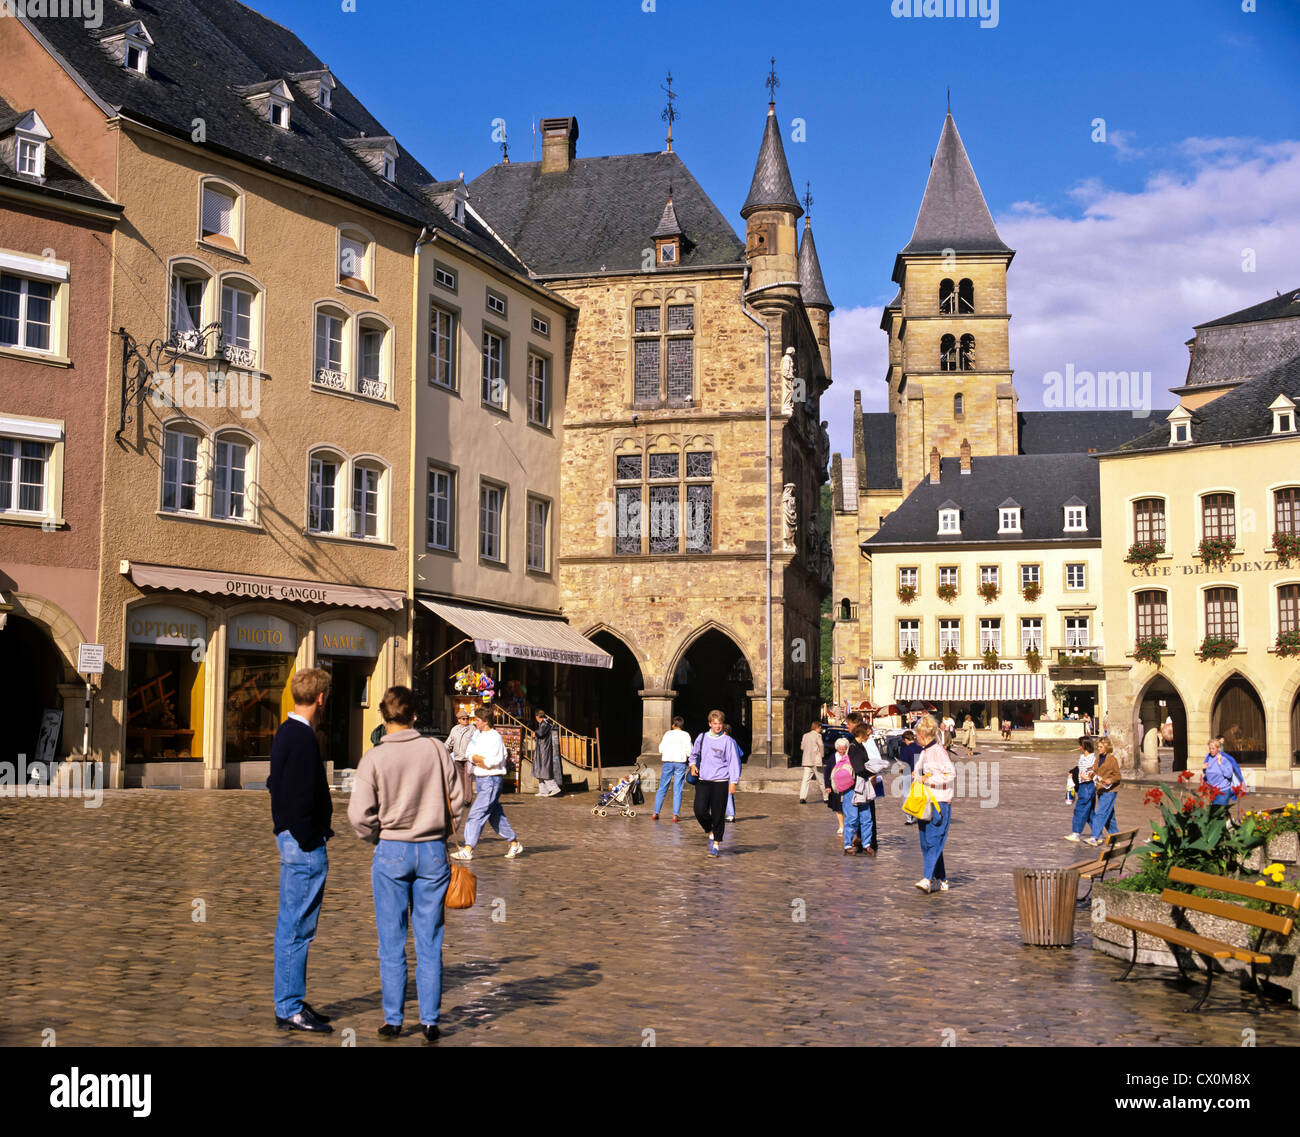 8187. Town square, Echternach, Luxembourg, Europe Stock Photo